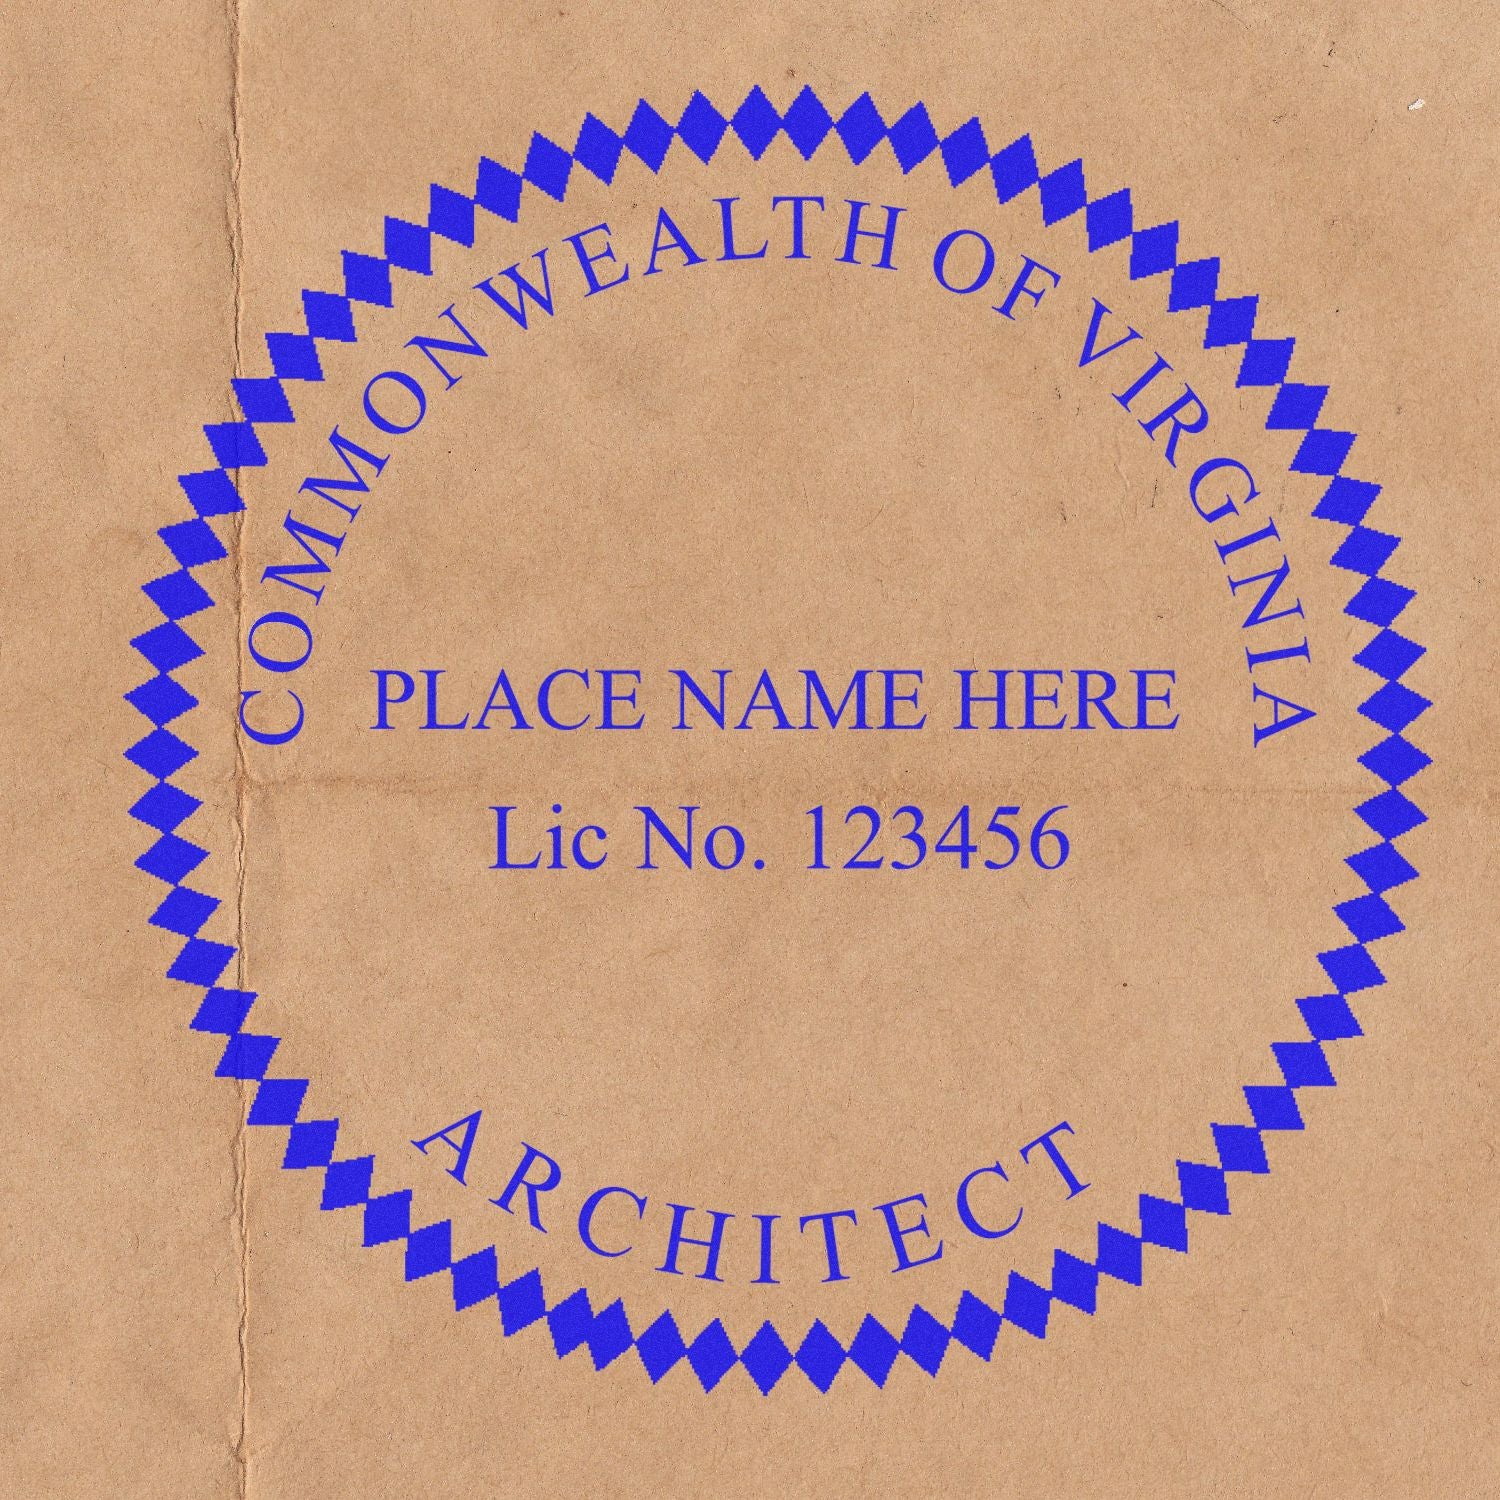 Slim Pre-Inked Virginia Architect Seal Stamp in use photo showing a stamped imprint of the Slim Pre-Inked Virginia Architect Seal Stamp